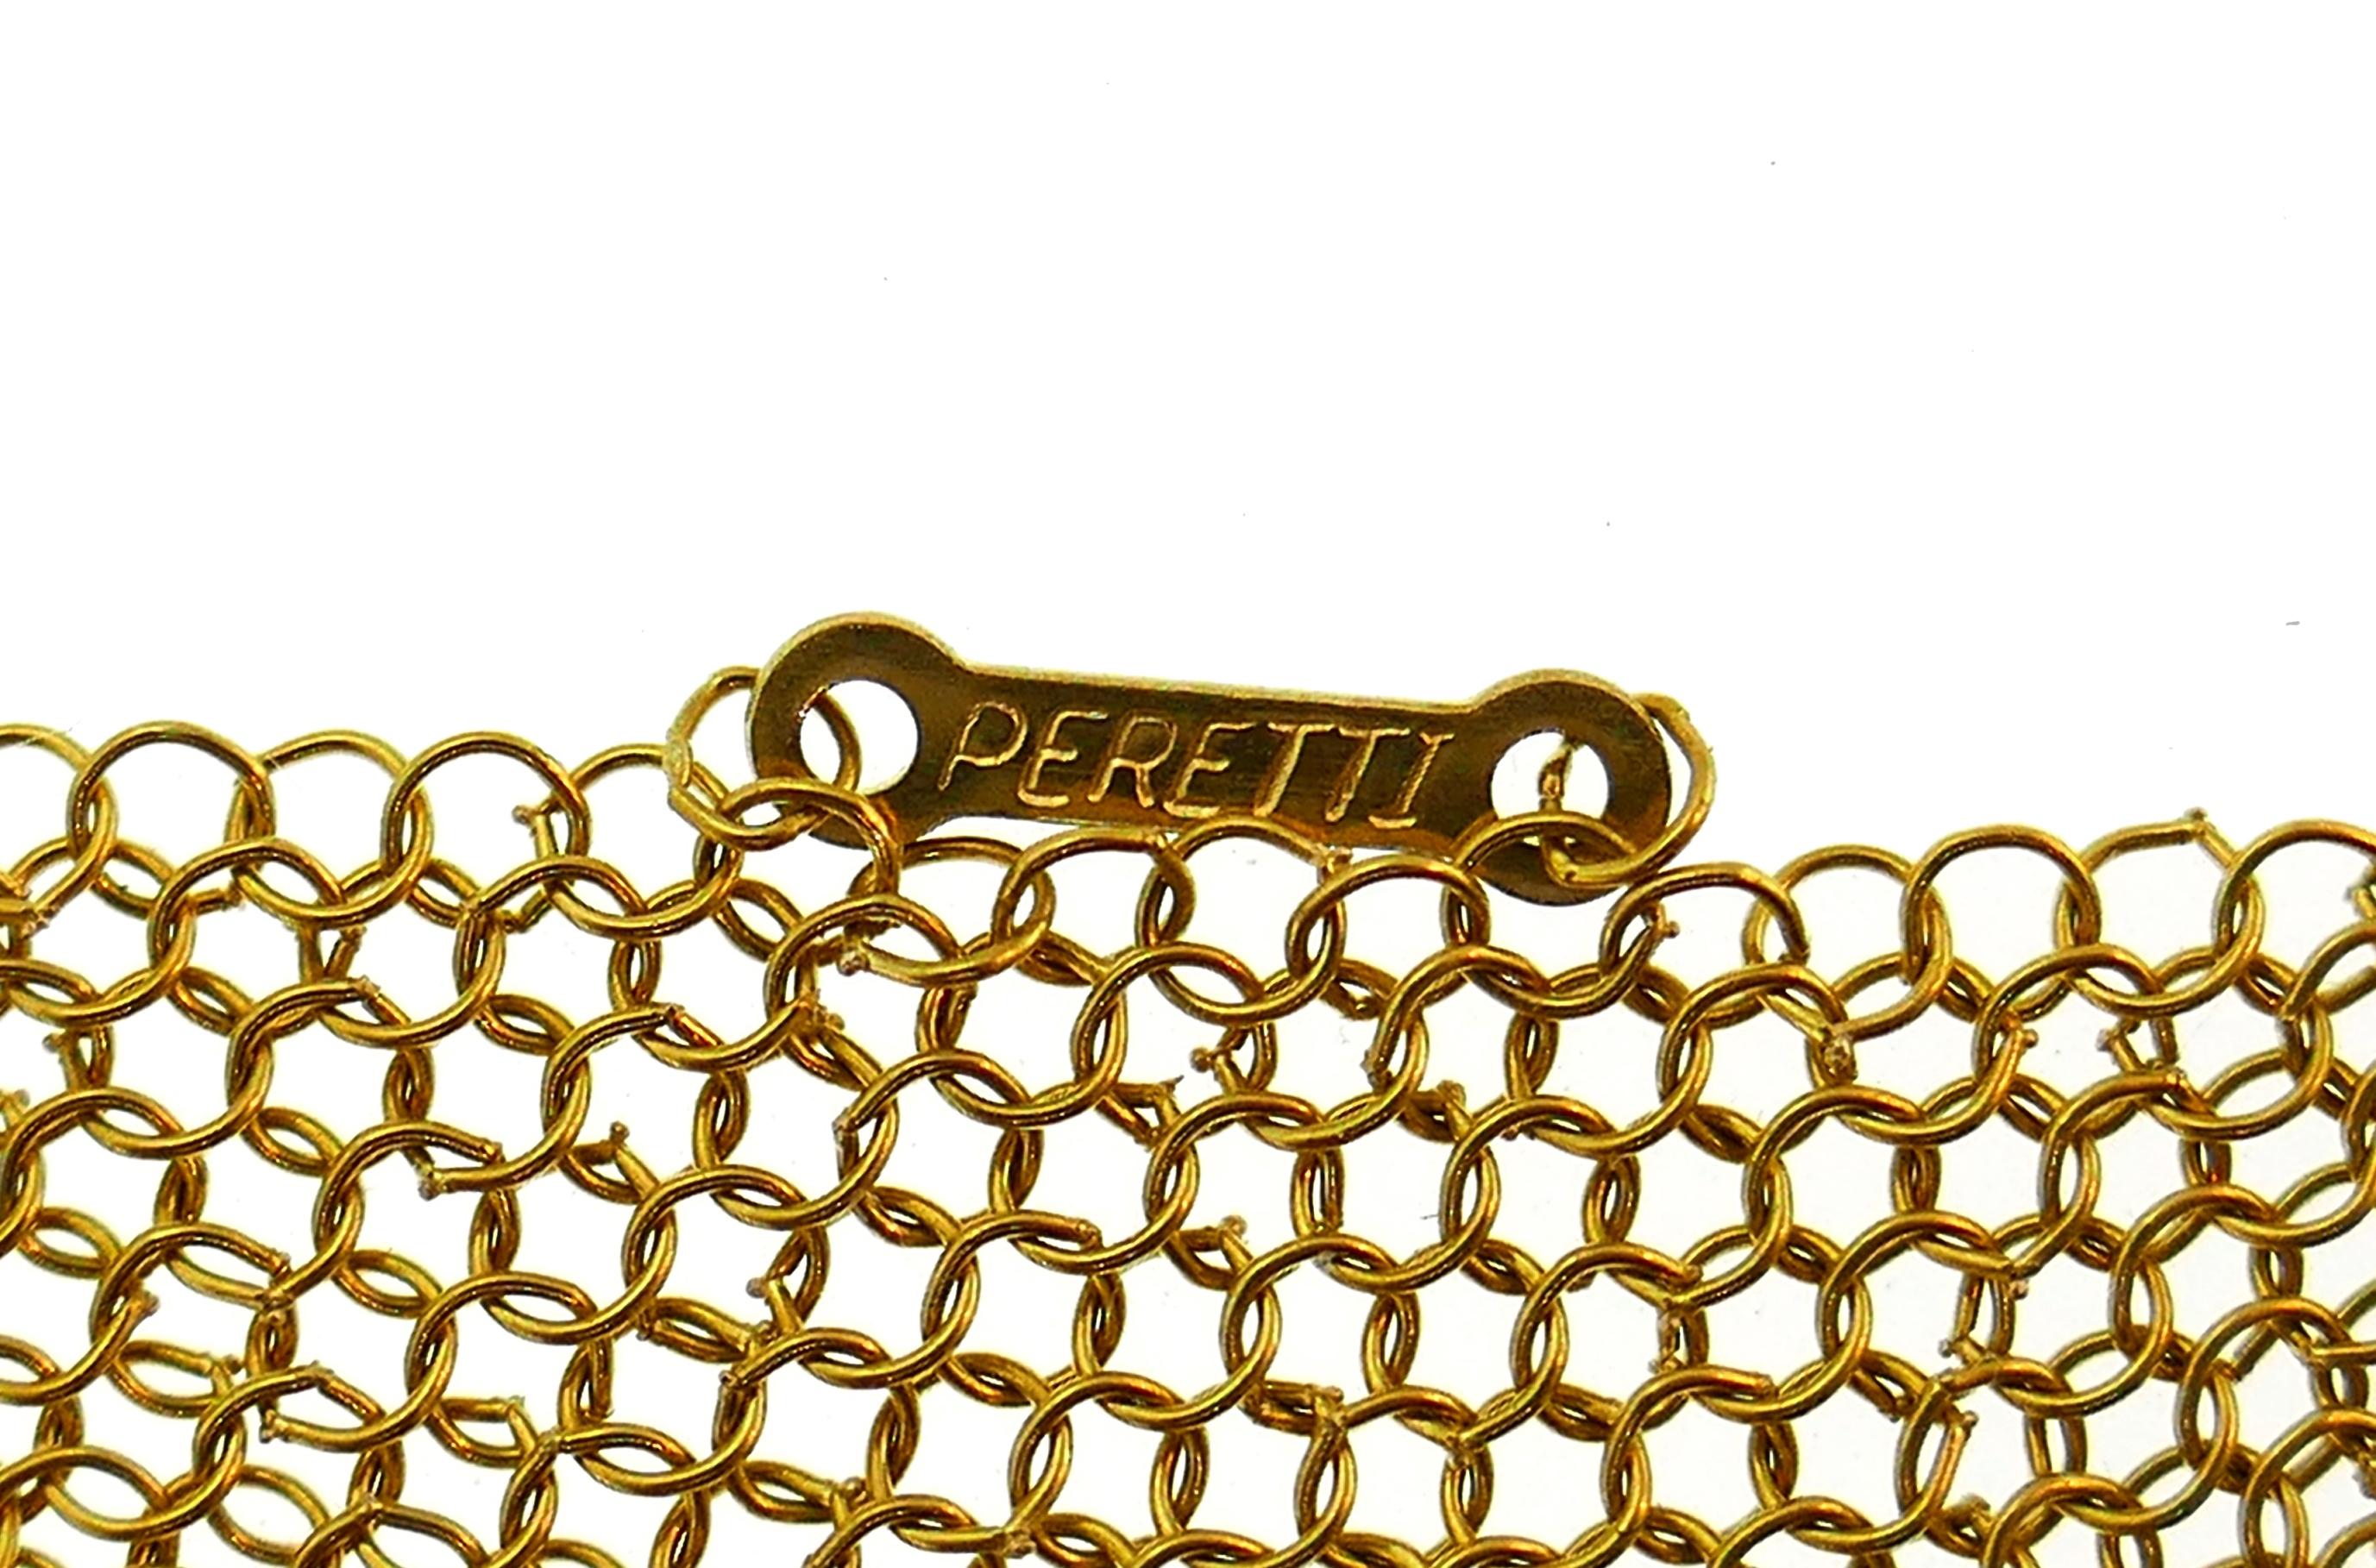 Tiffany & Co. Peretti Gold Mesh Scarf Necklace Large 1